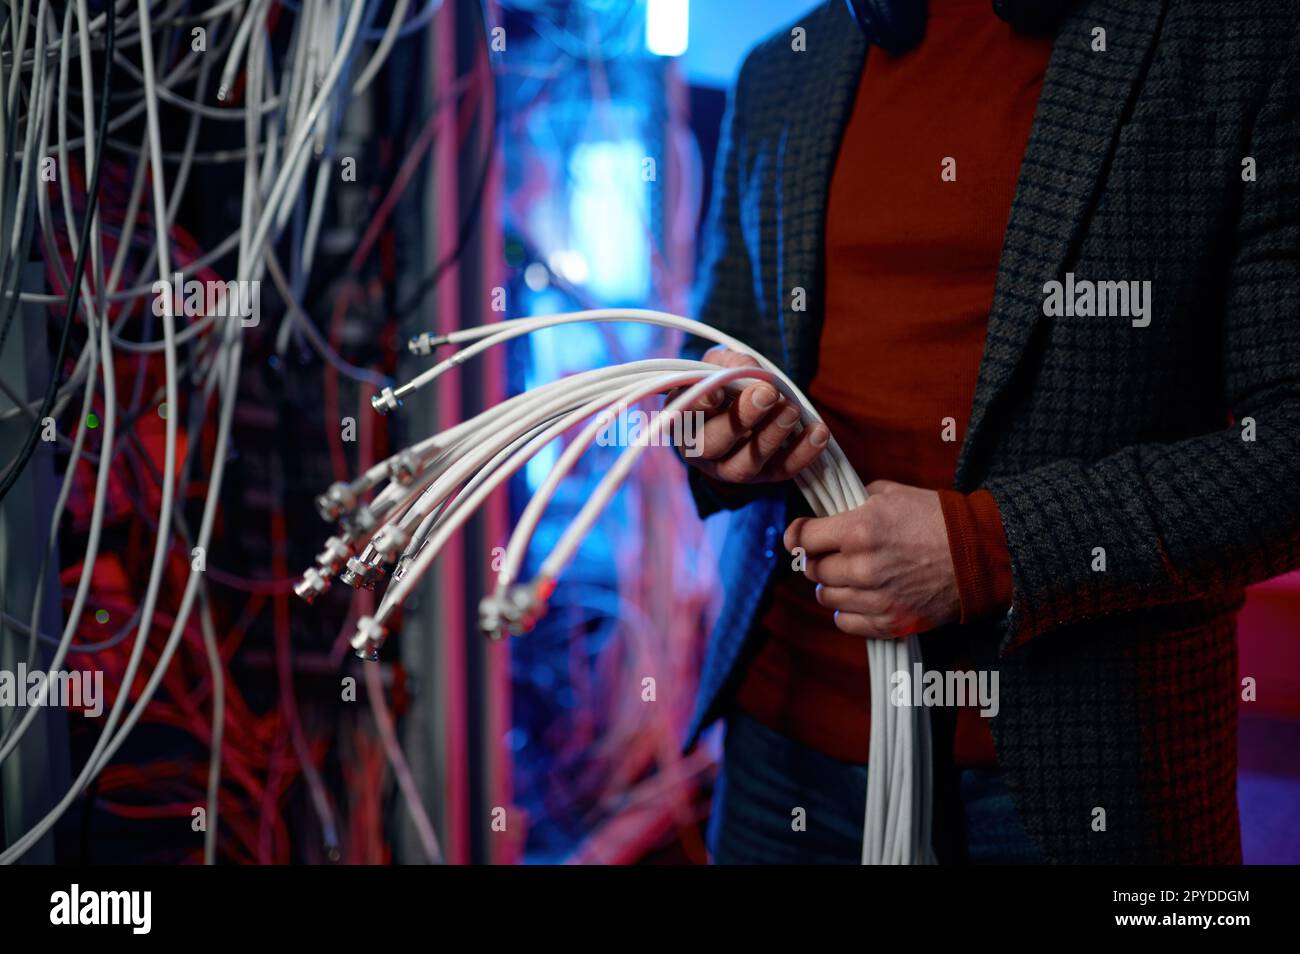 IT man with bunch of cables in hands in server room Stock Photo